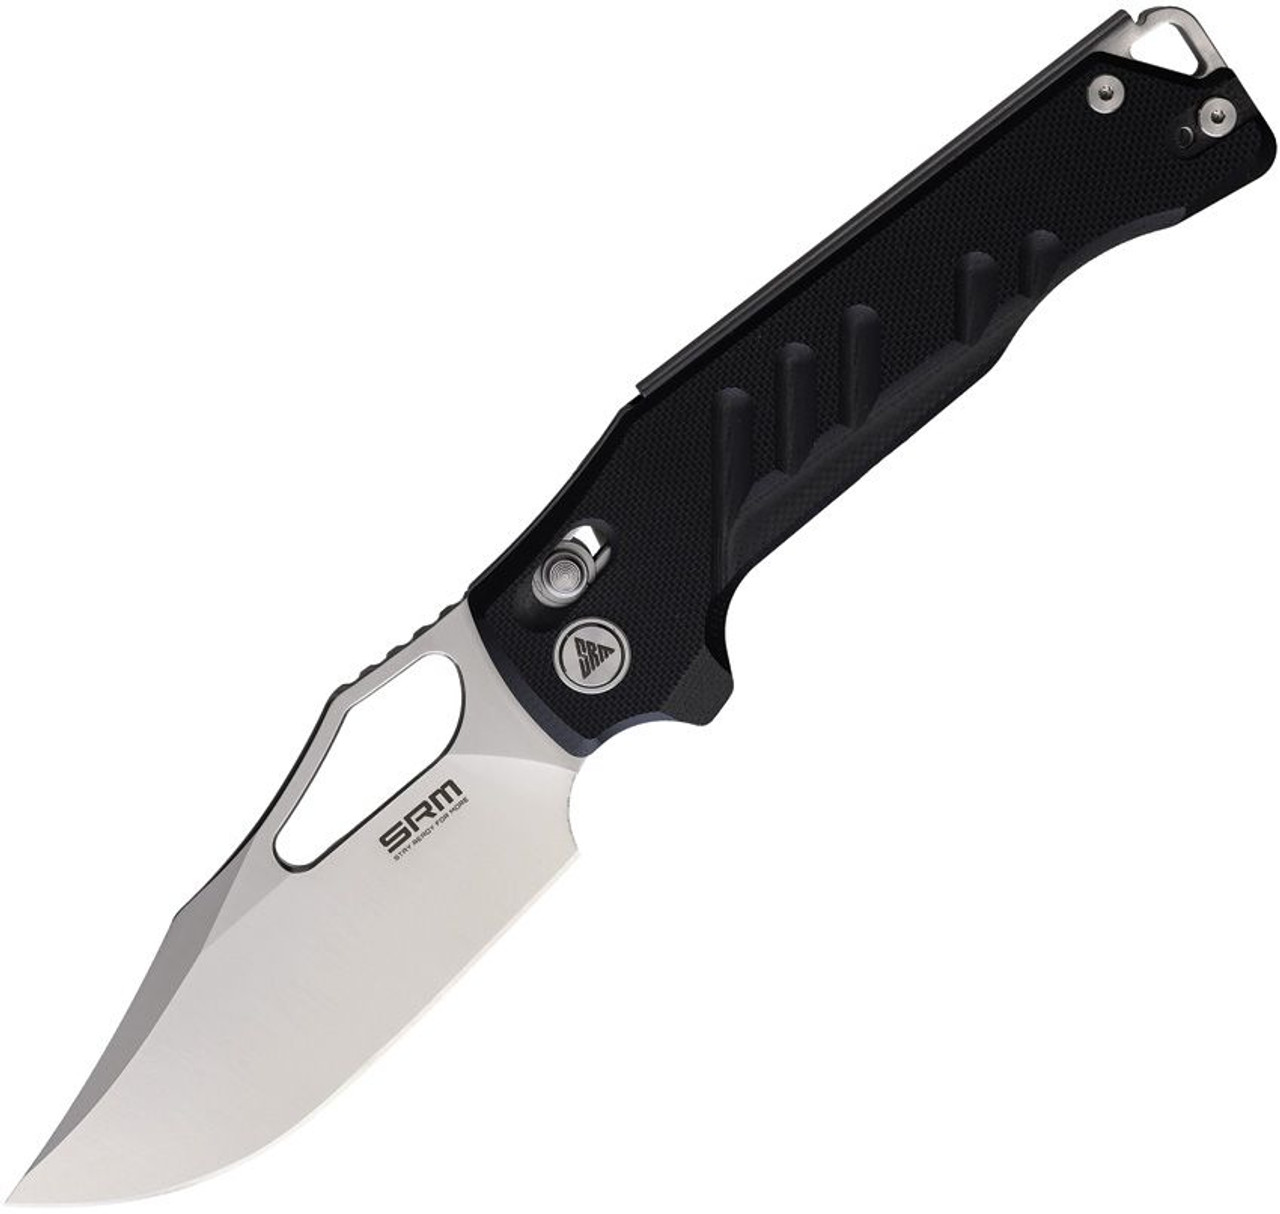 BSA G10 Serrated Knife, 3 1/2 Blade in oxidized Black 7CR17 Stainless  Steel with Black Anodized G10 Handle